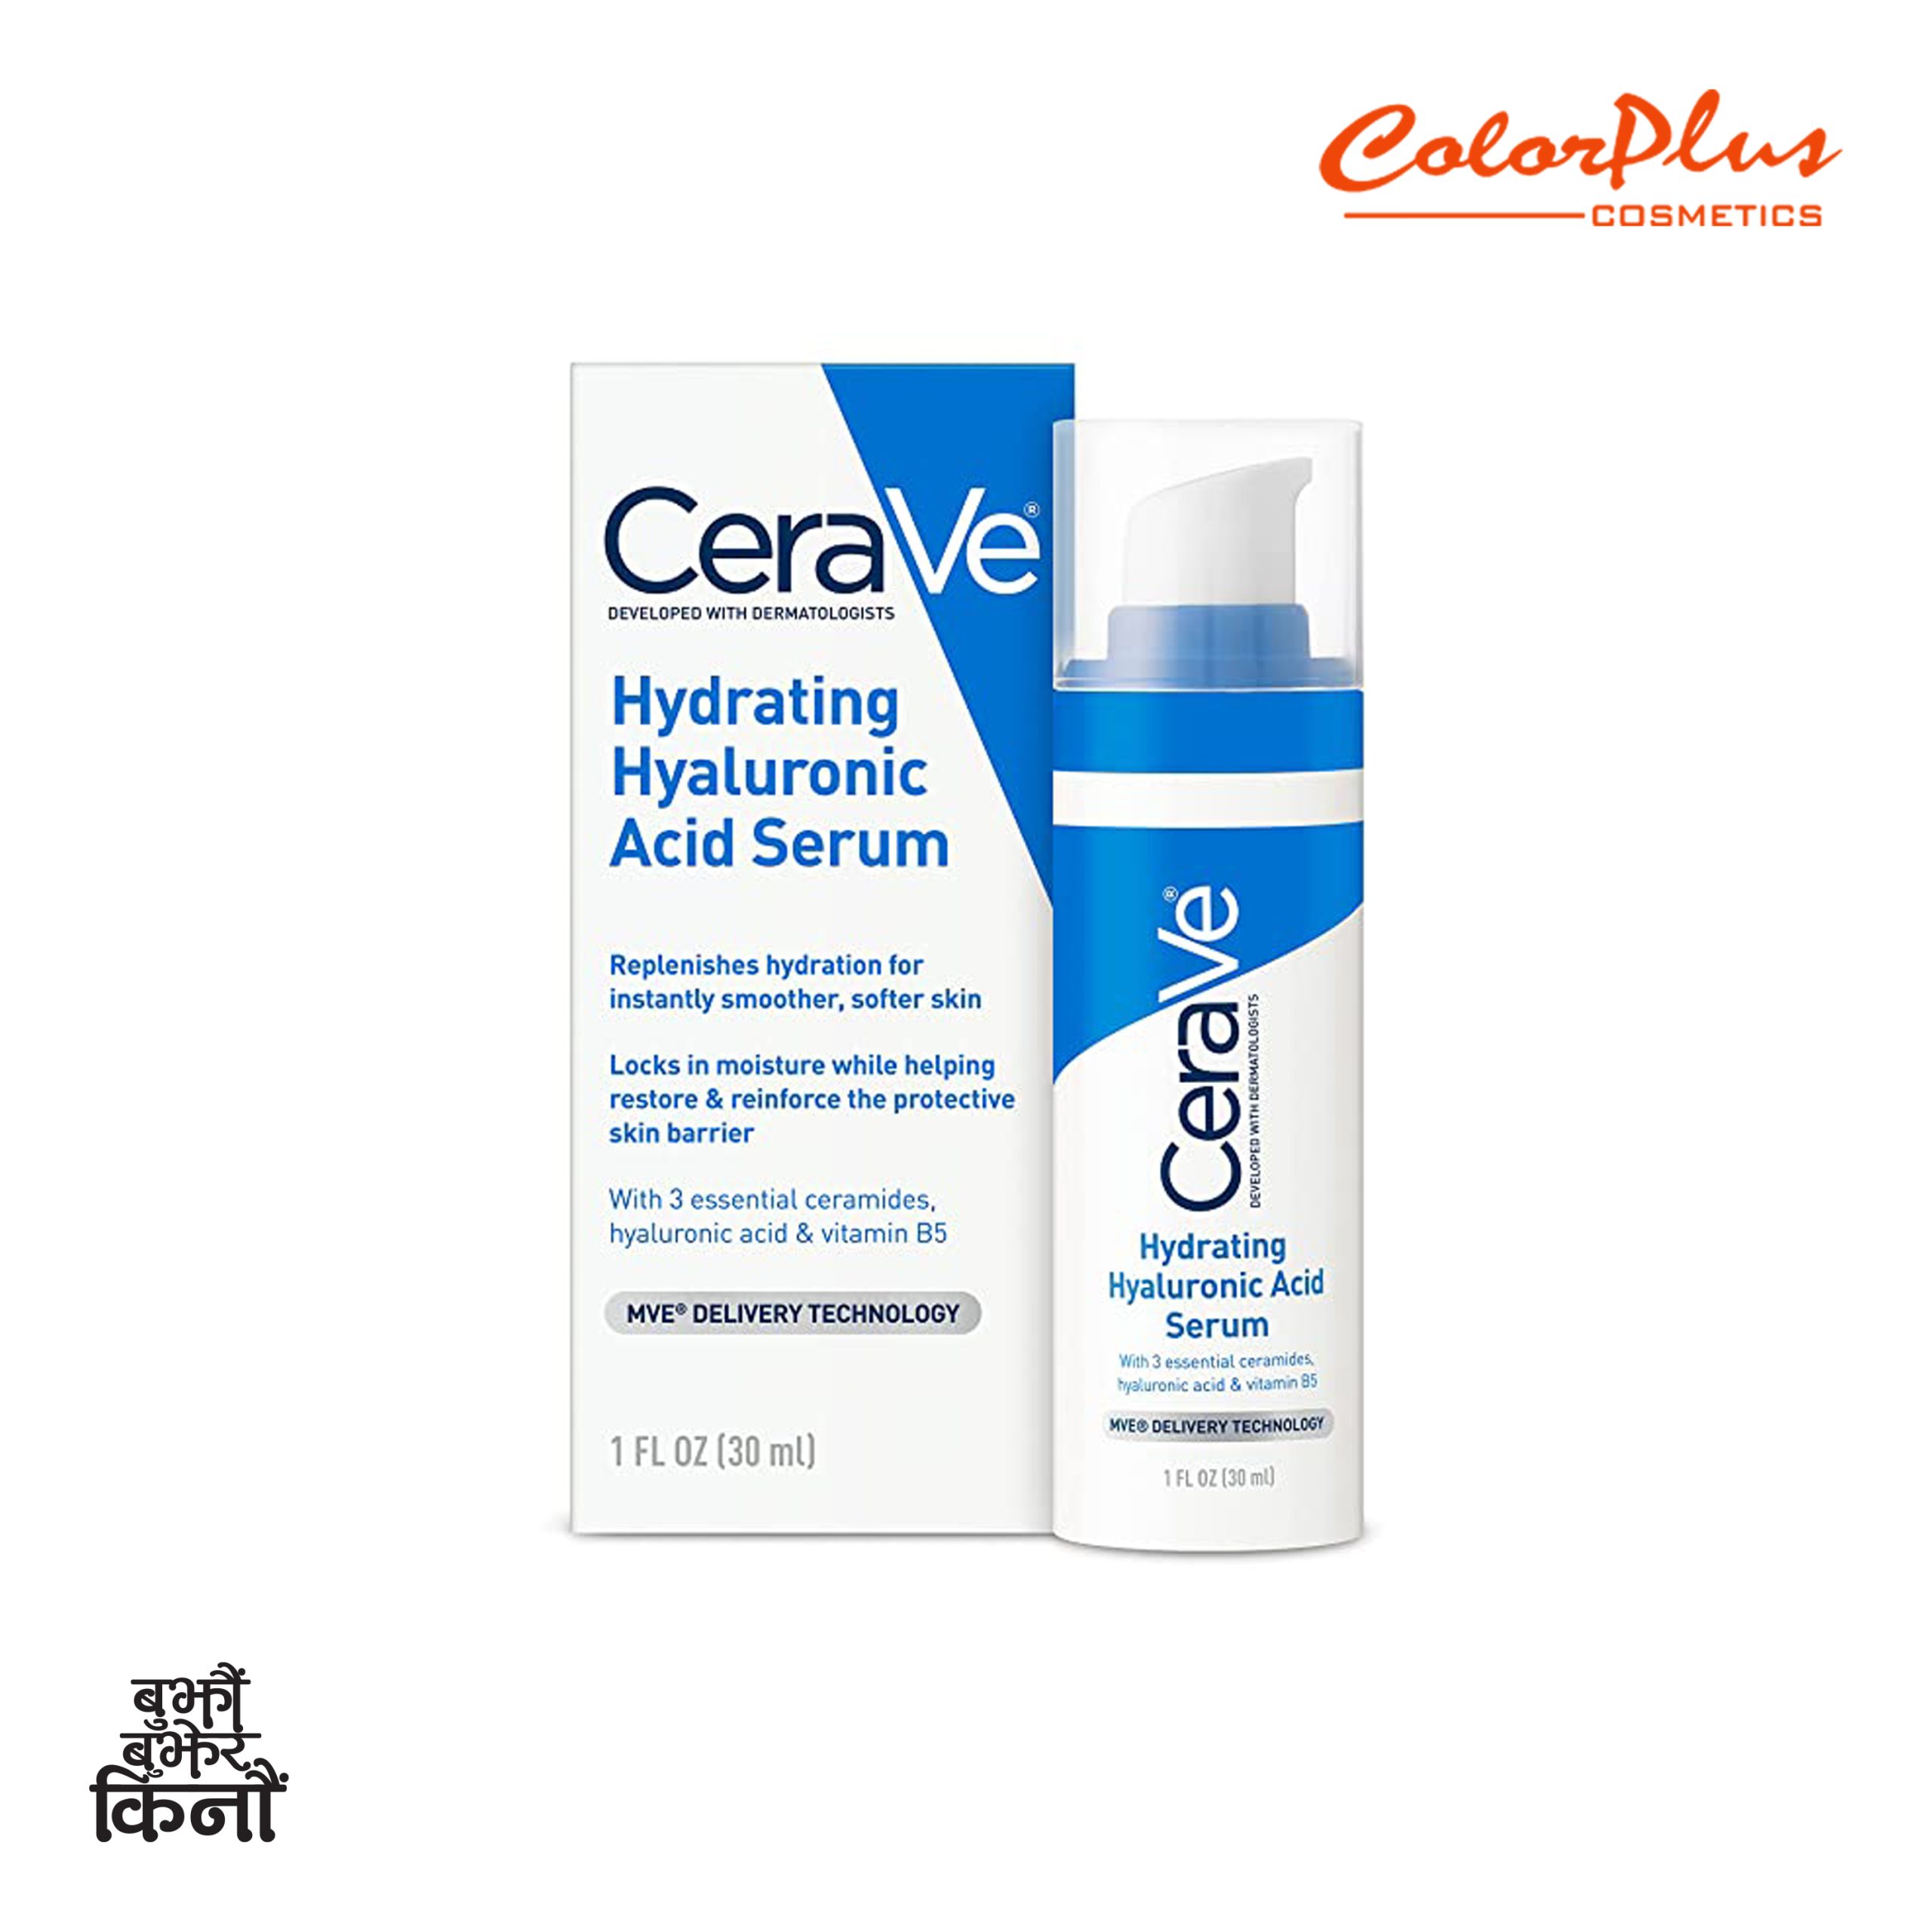 ColorPlus Cosmetics Cerave Hydrating Hyaluronic Acid Serum scaled